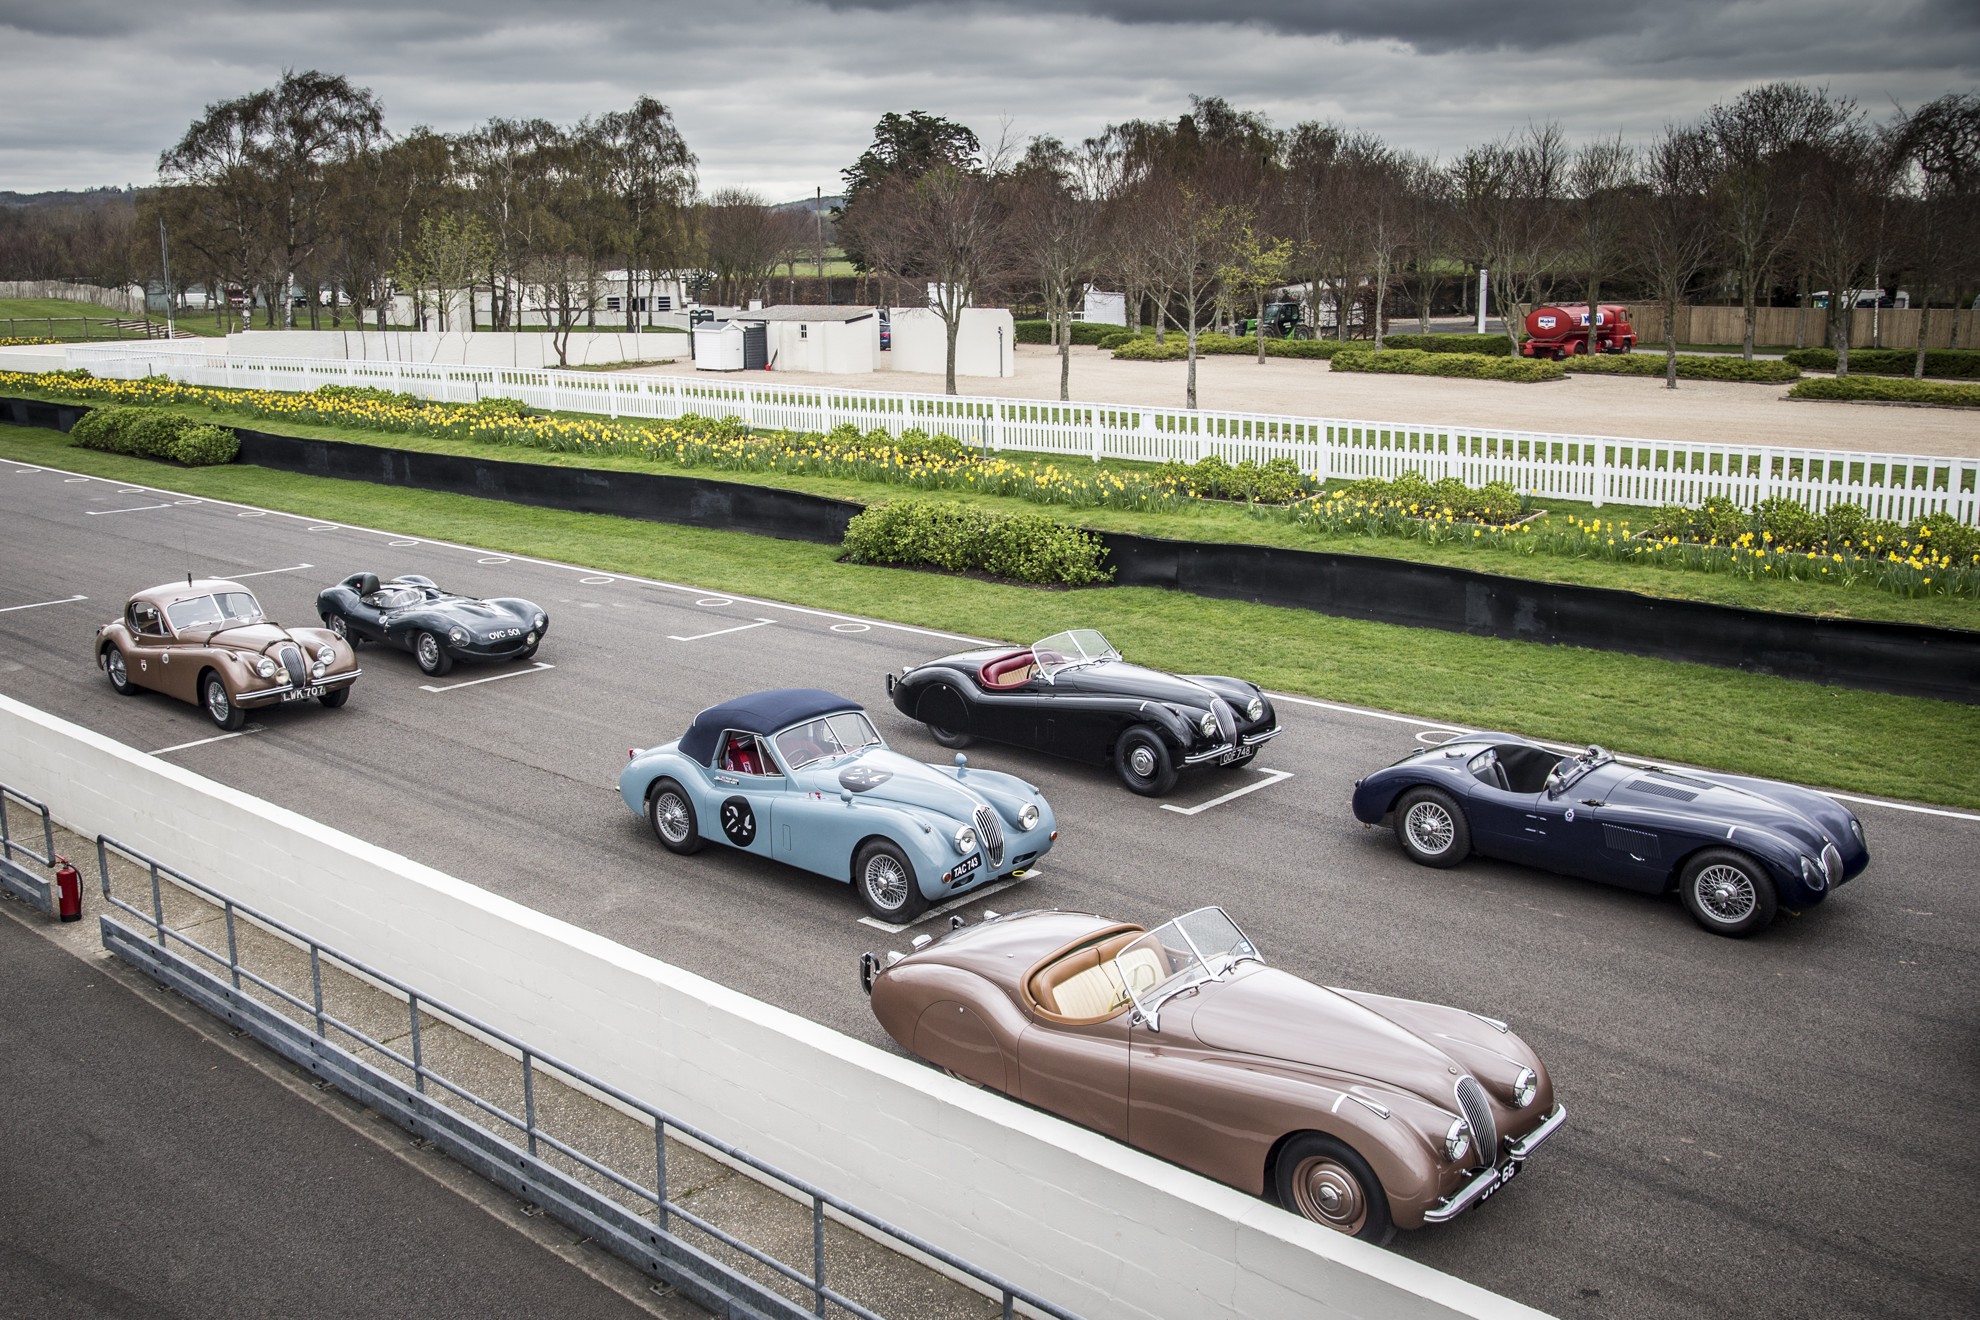 Jaguar Announces a Stellar Line-Up Of Cars and Drivers for the 2014 Mille Miglia